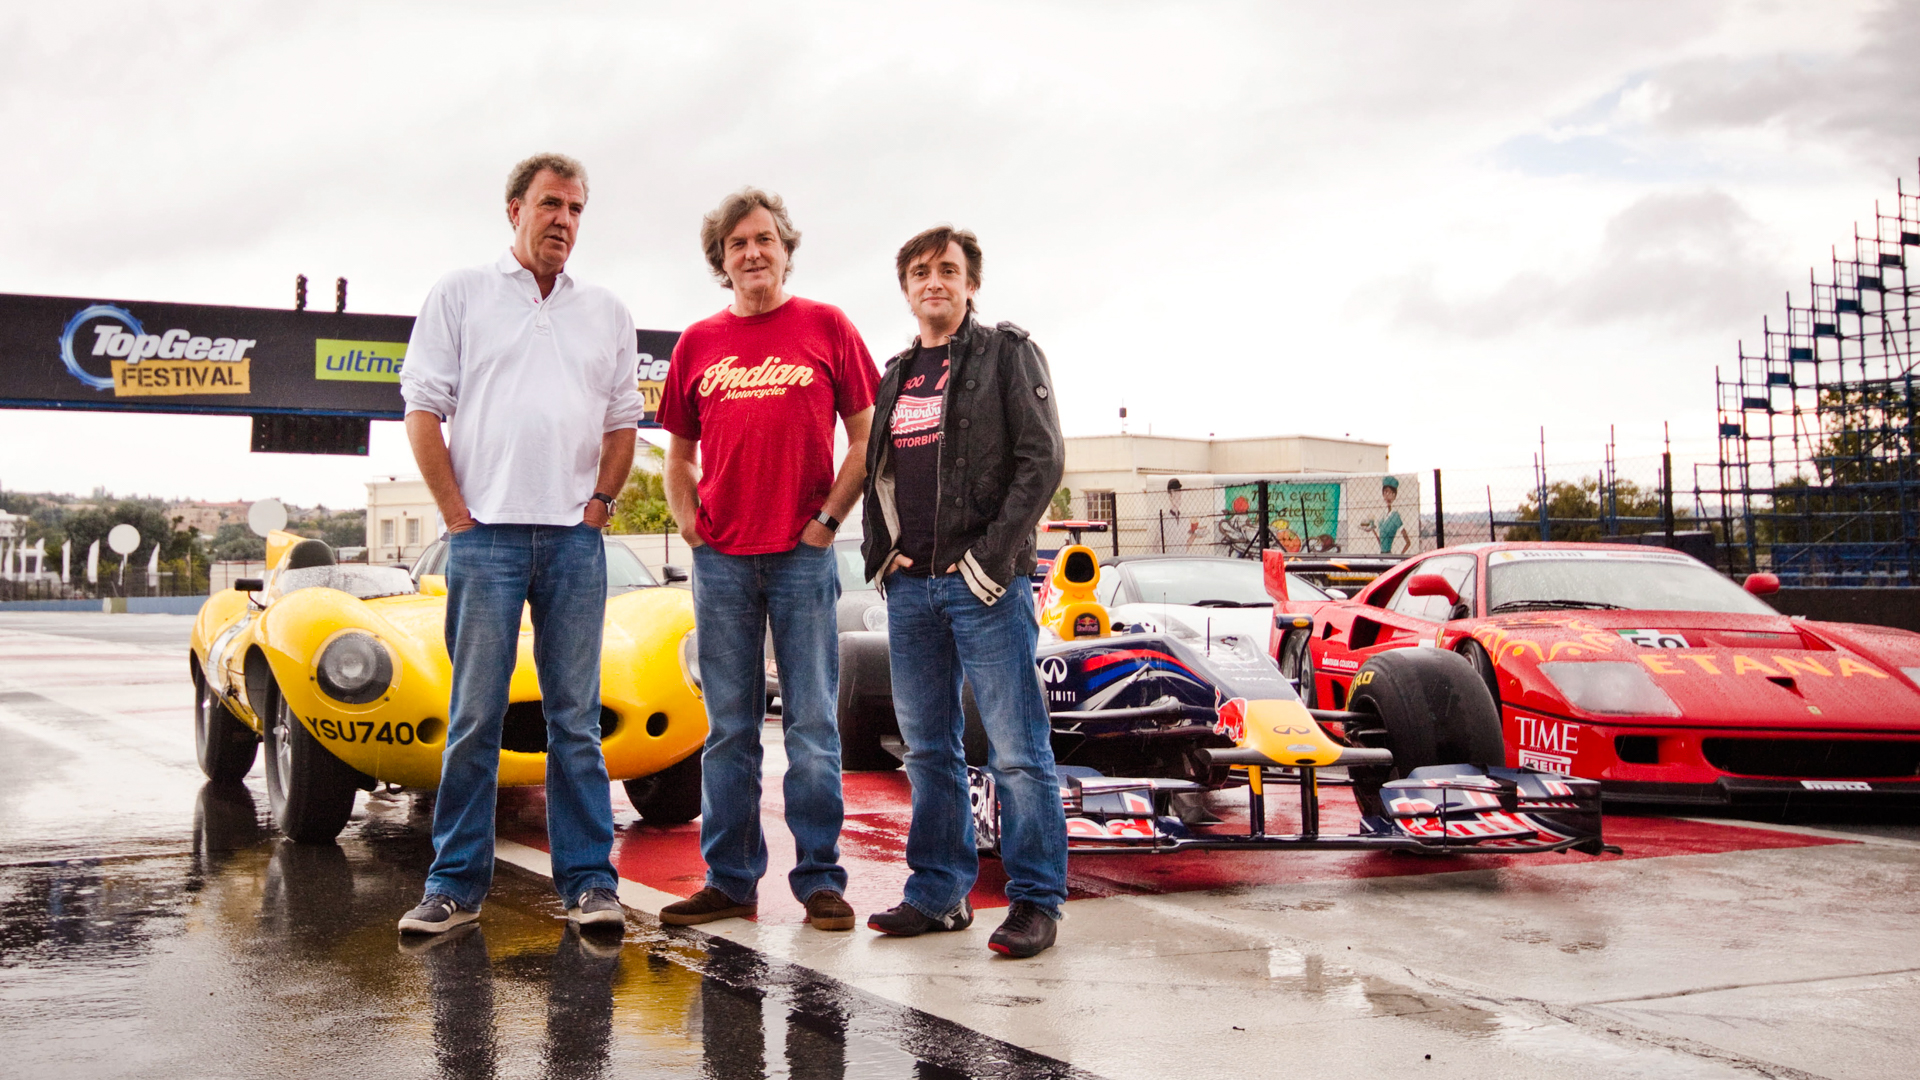 Clarkson, Hammond, and May's Grand Tour Tenure Is Coming to an End